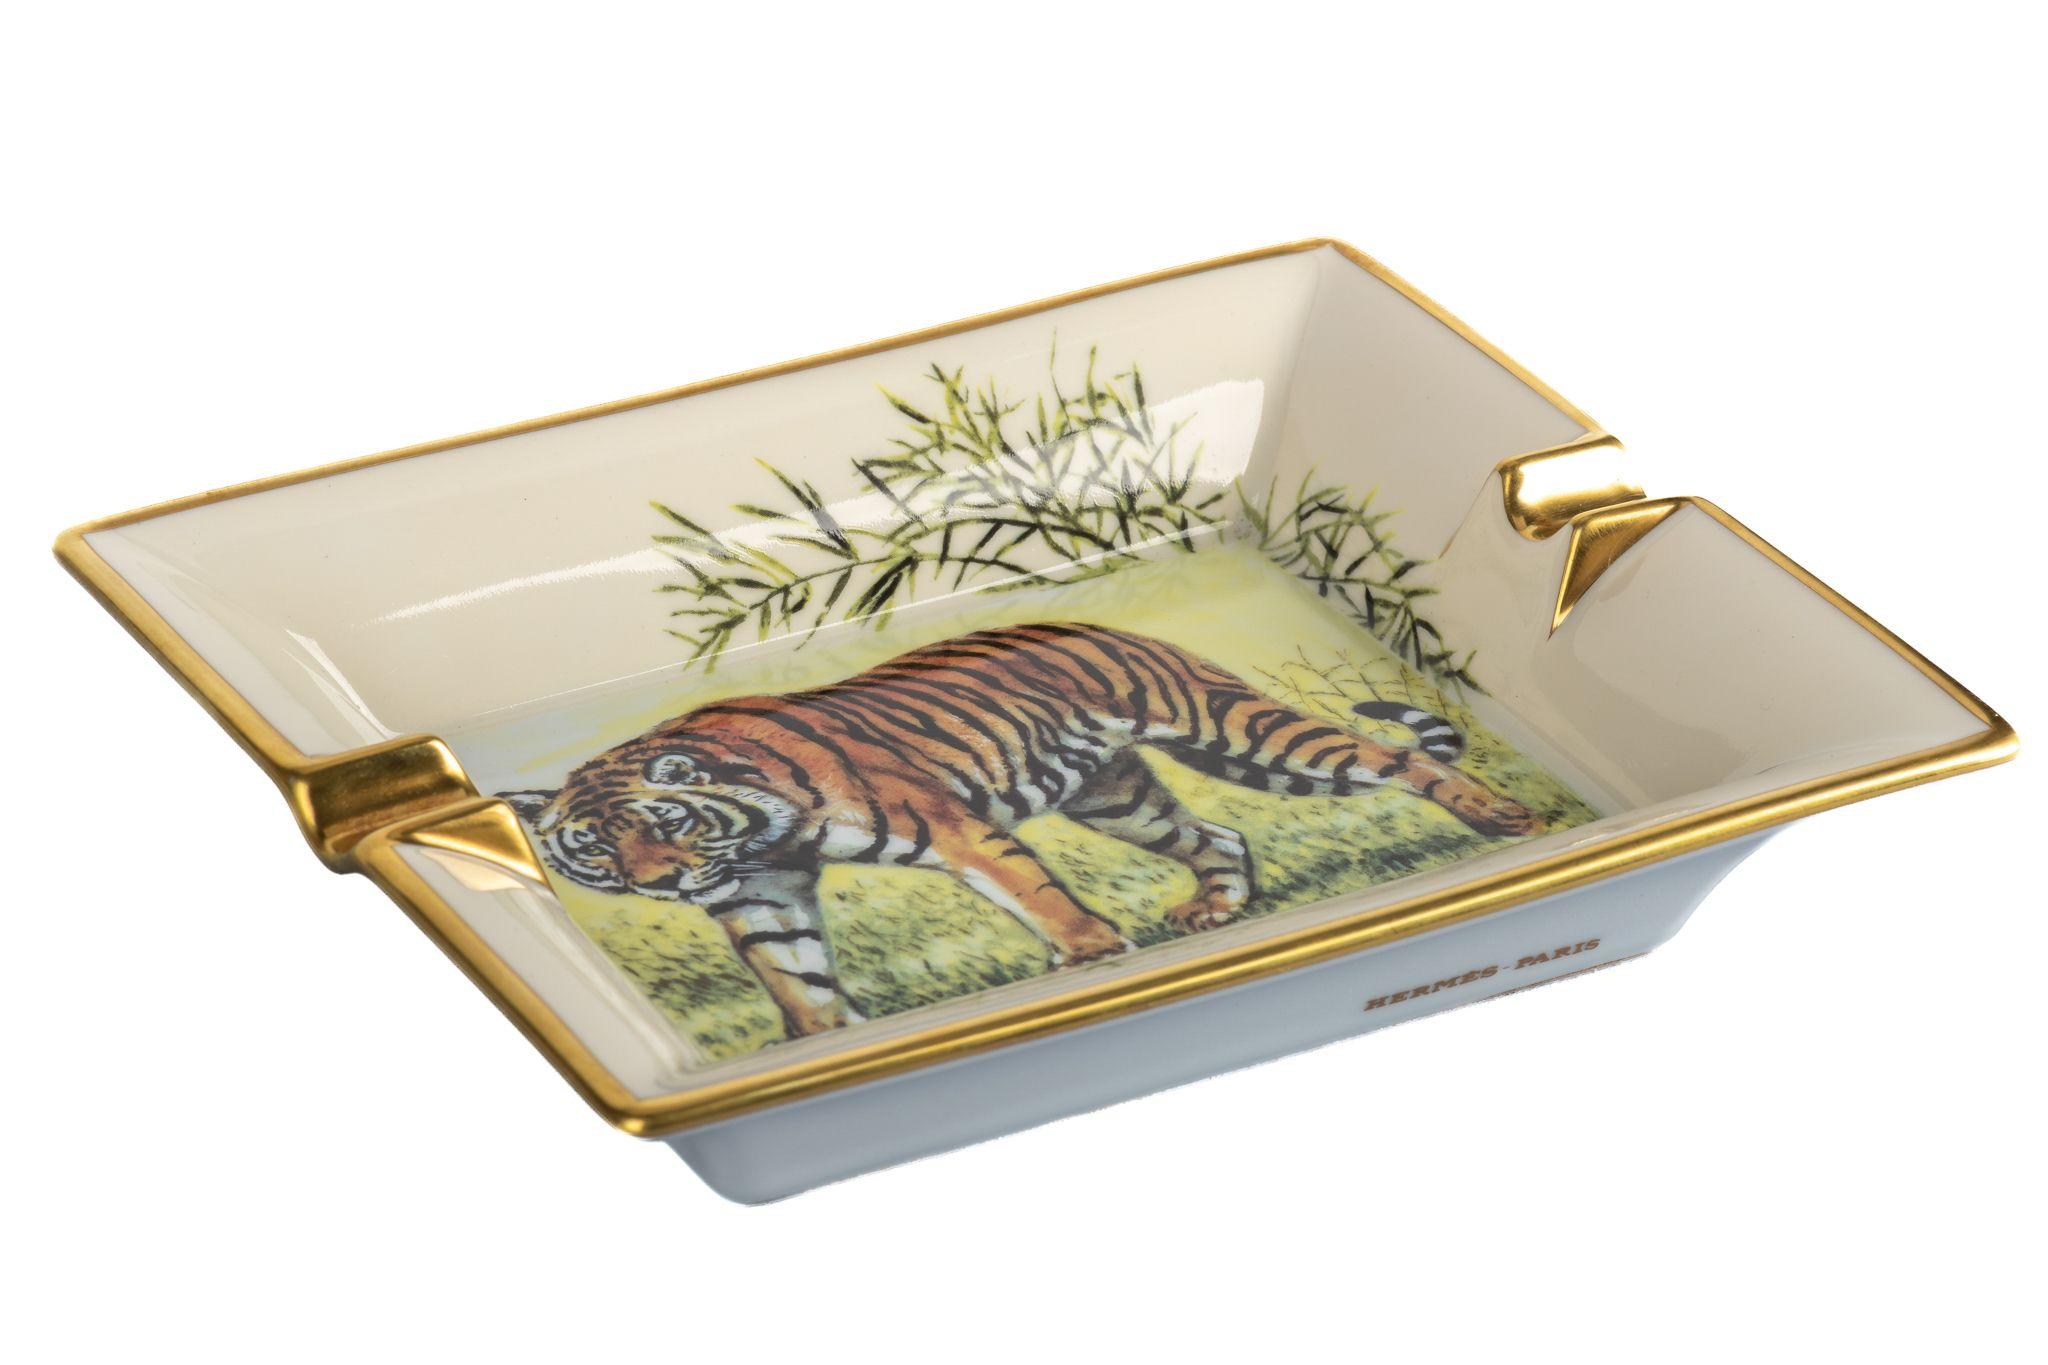 Hermes signature ashtray with tiger design in white and gold. Suede stamped bottom. Made in France.